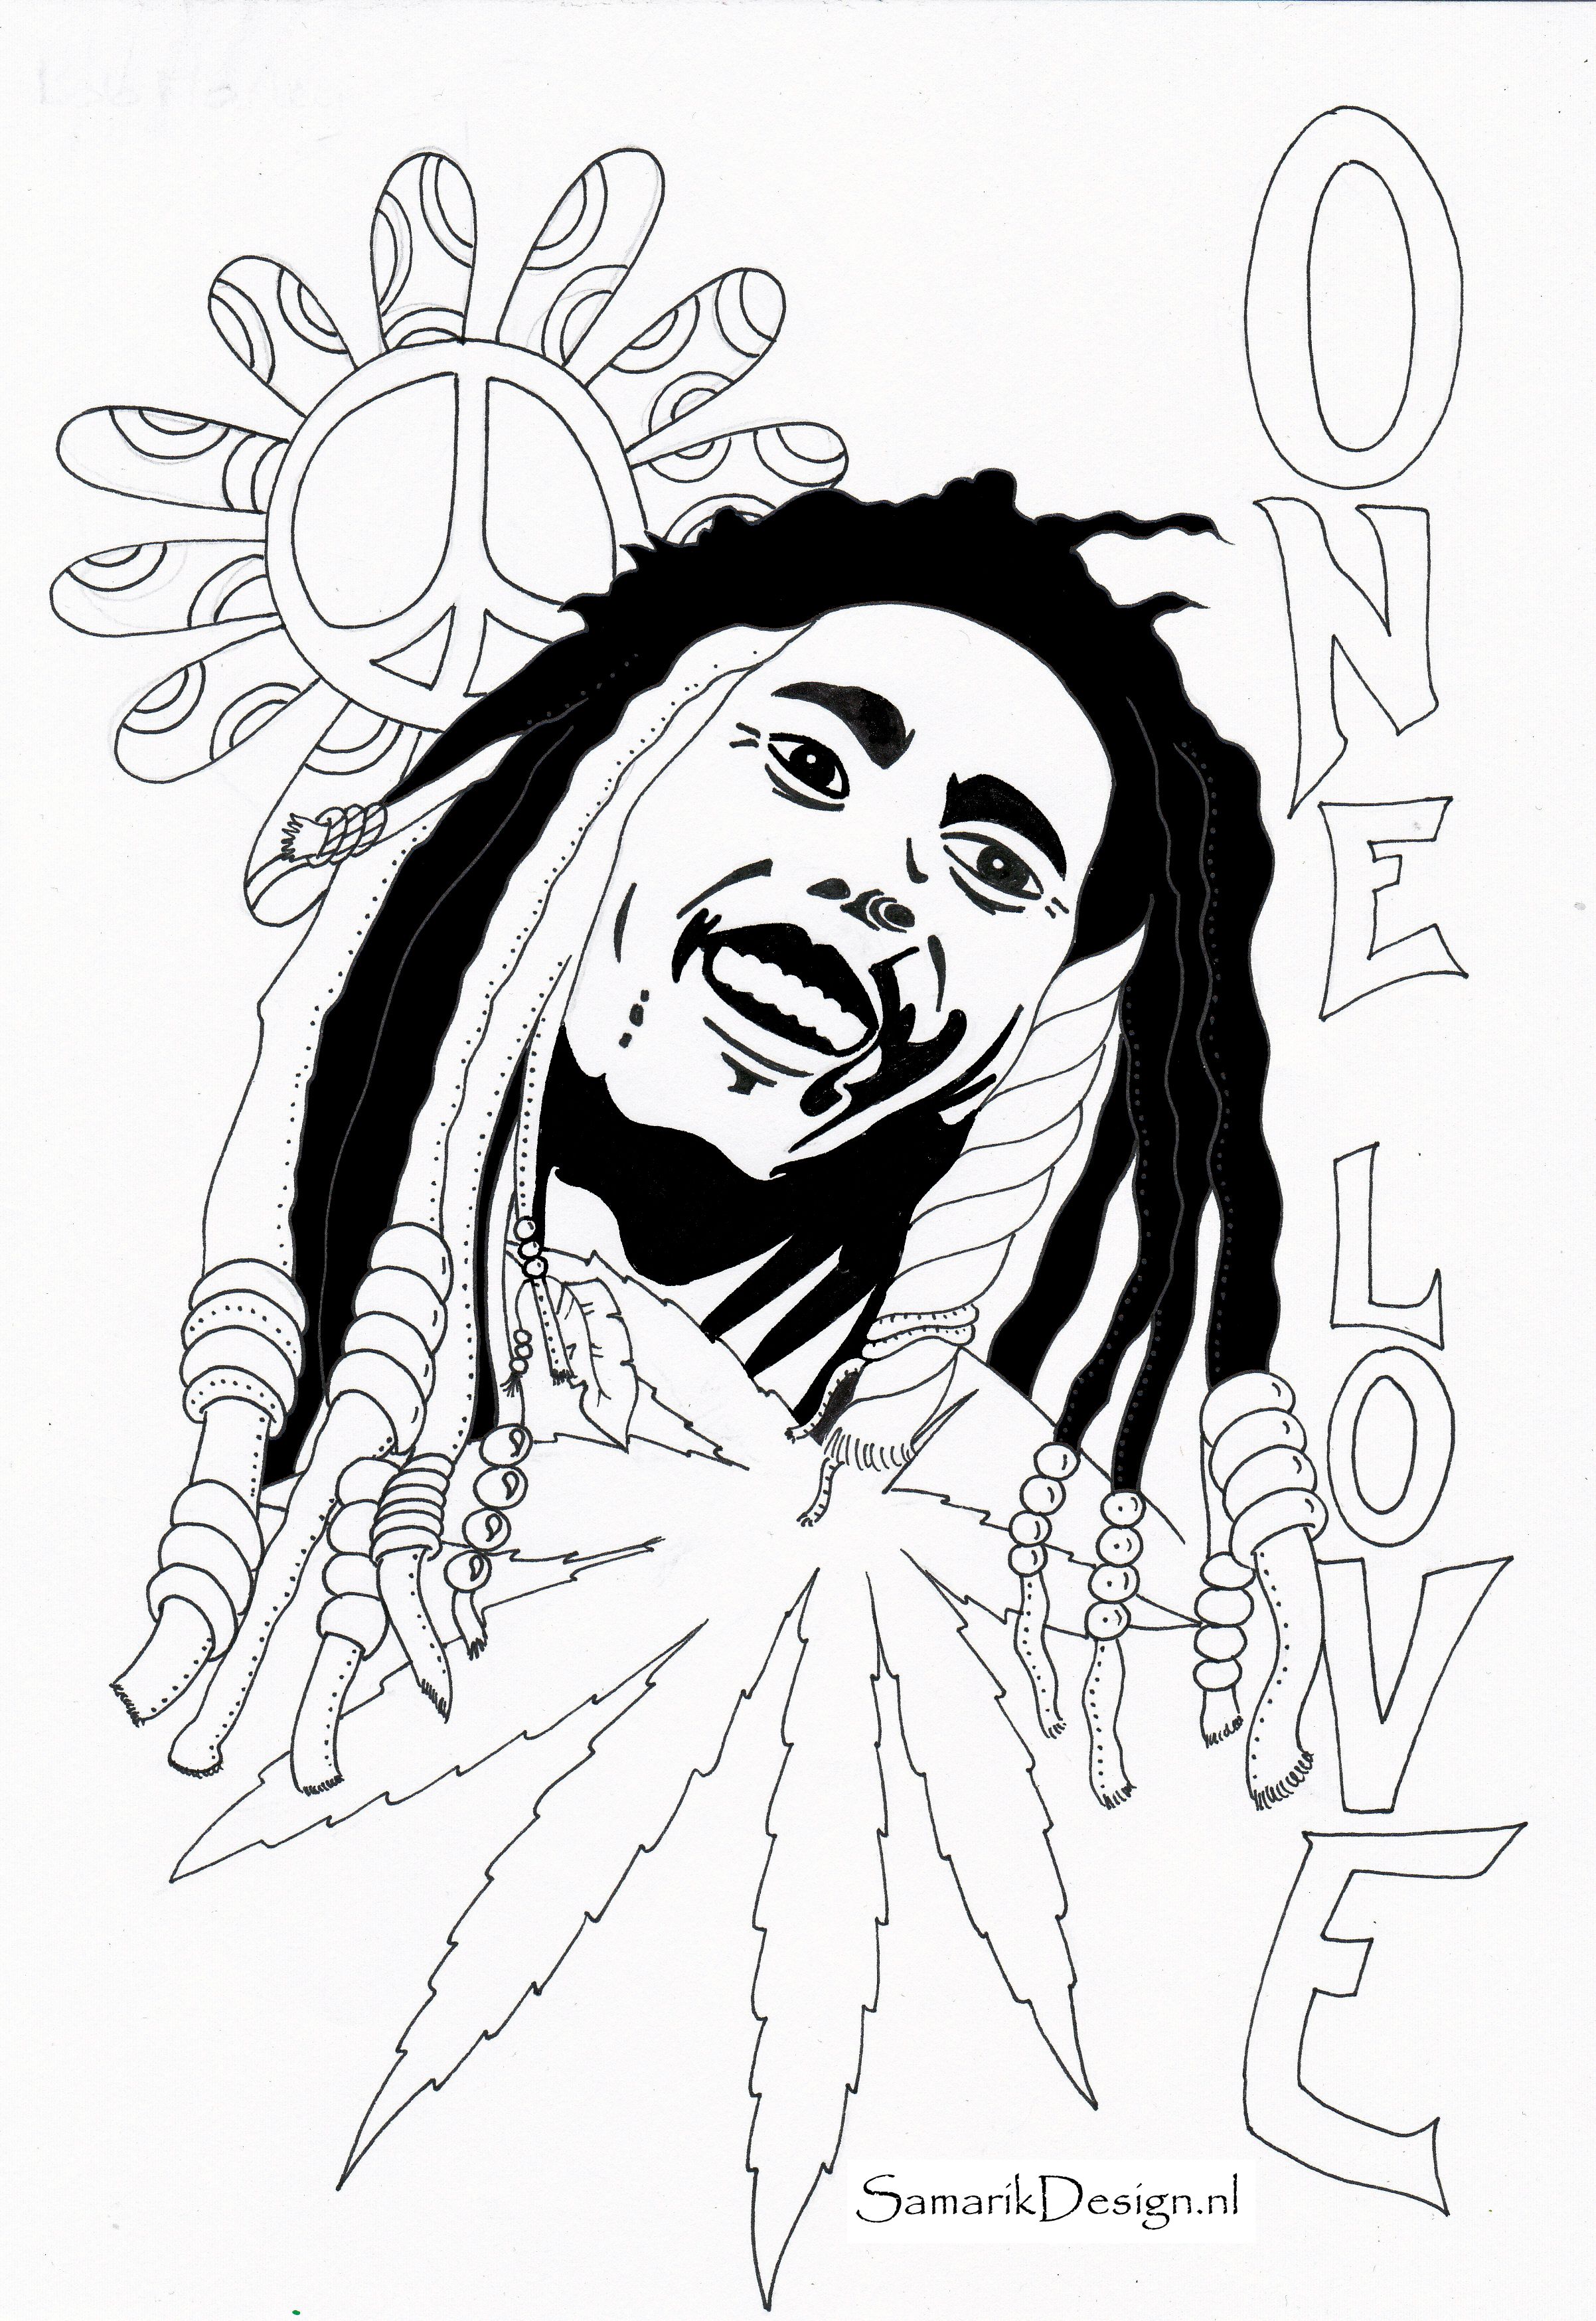 Bob Marley Famous people | Coloring pages, Drawings, Adult coloring